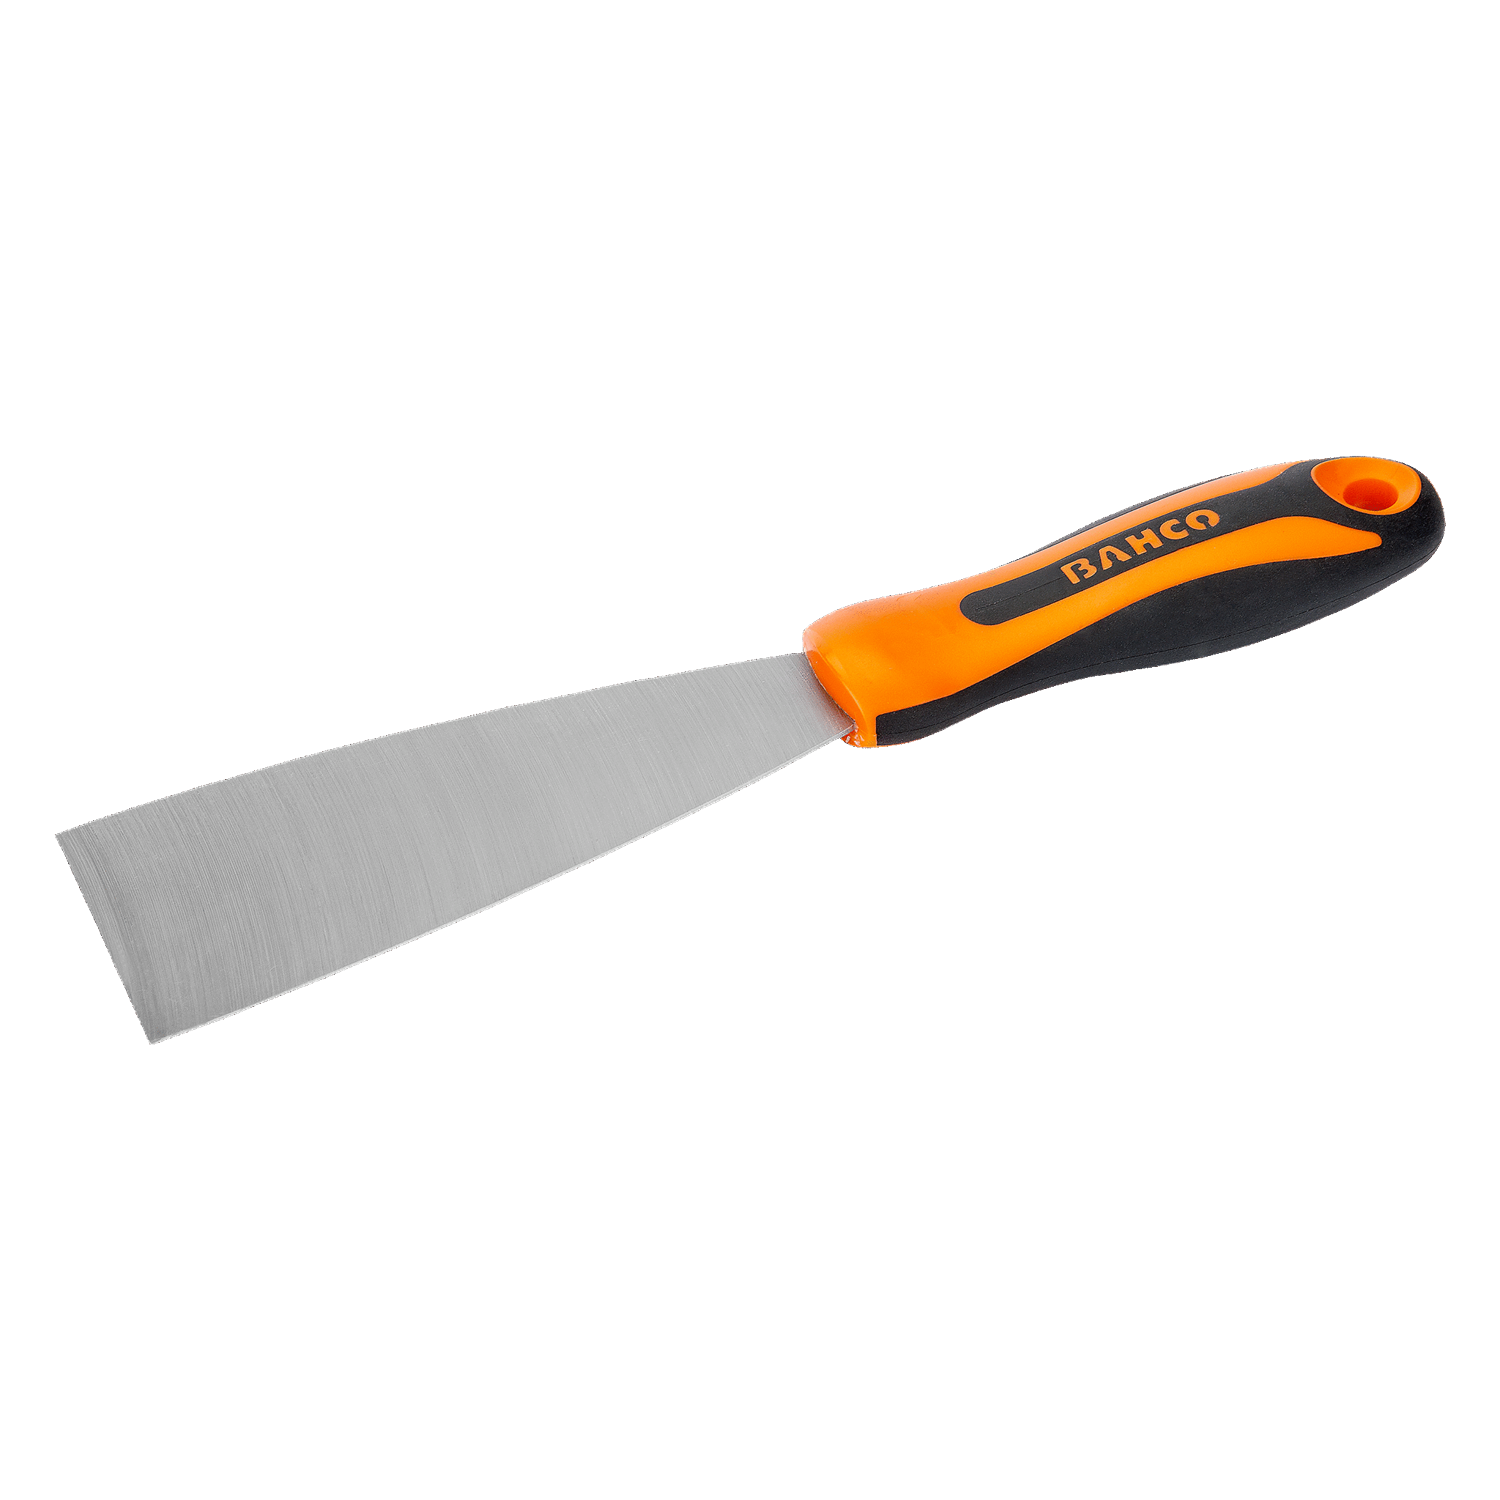 BAHCO 2150 Paint Scraper with Dual-Component Handle - Premium Paint Scraper from BAHCO - Shop now at Yew Aik.